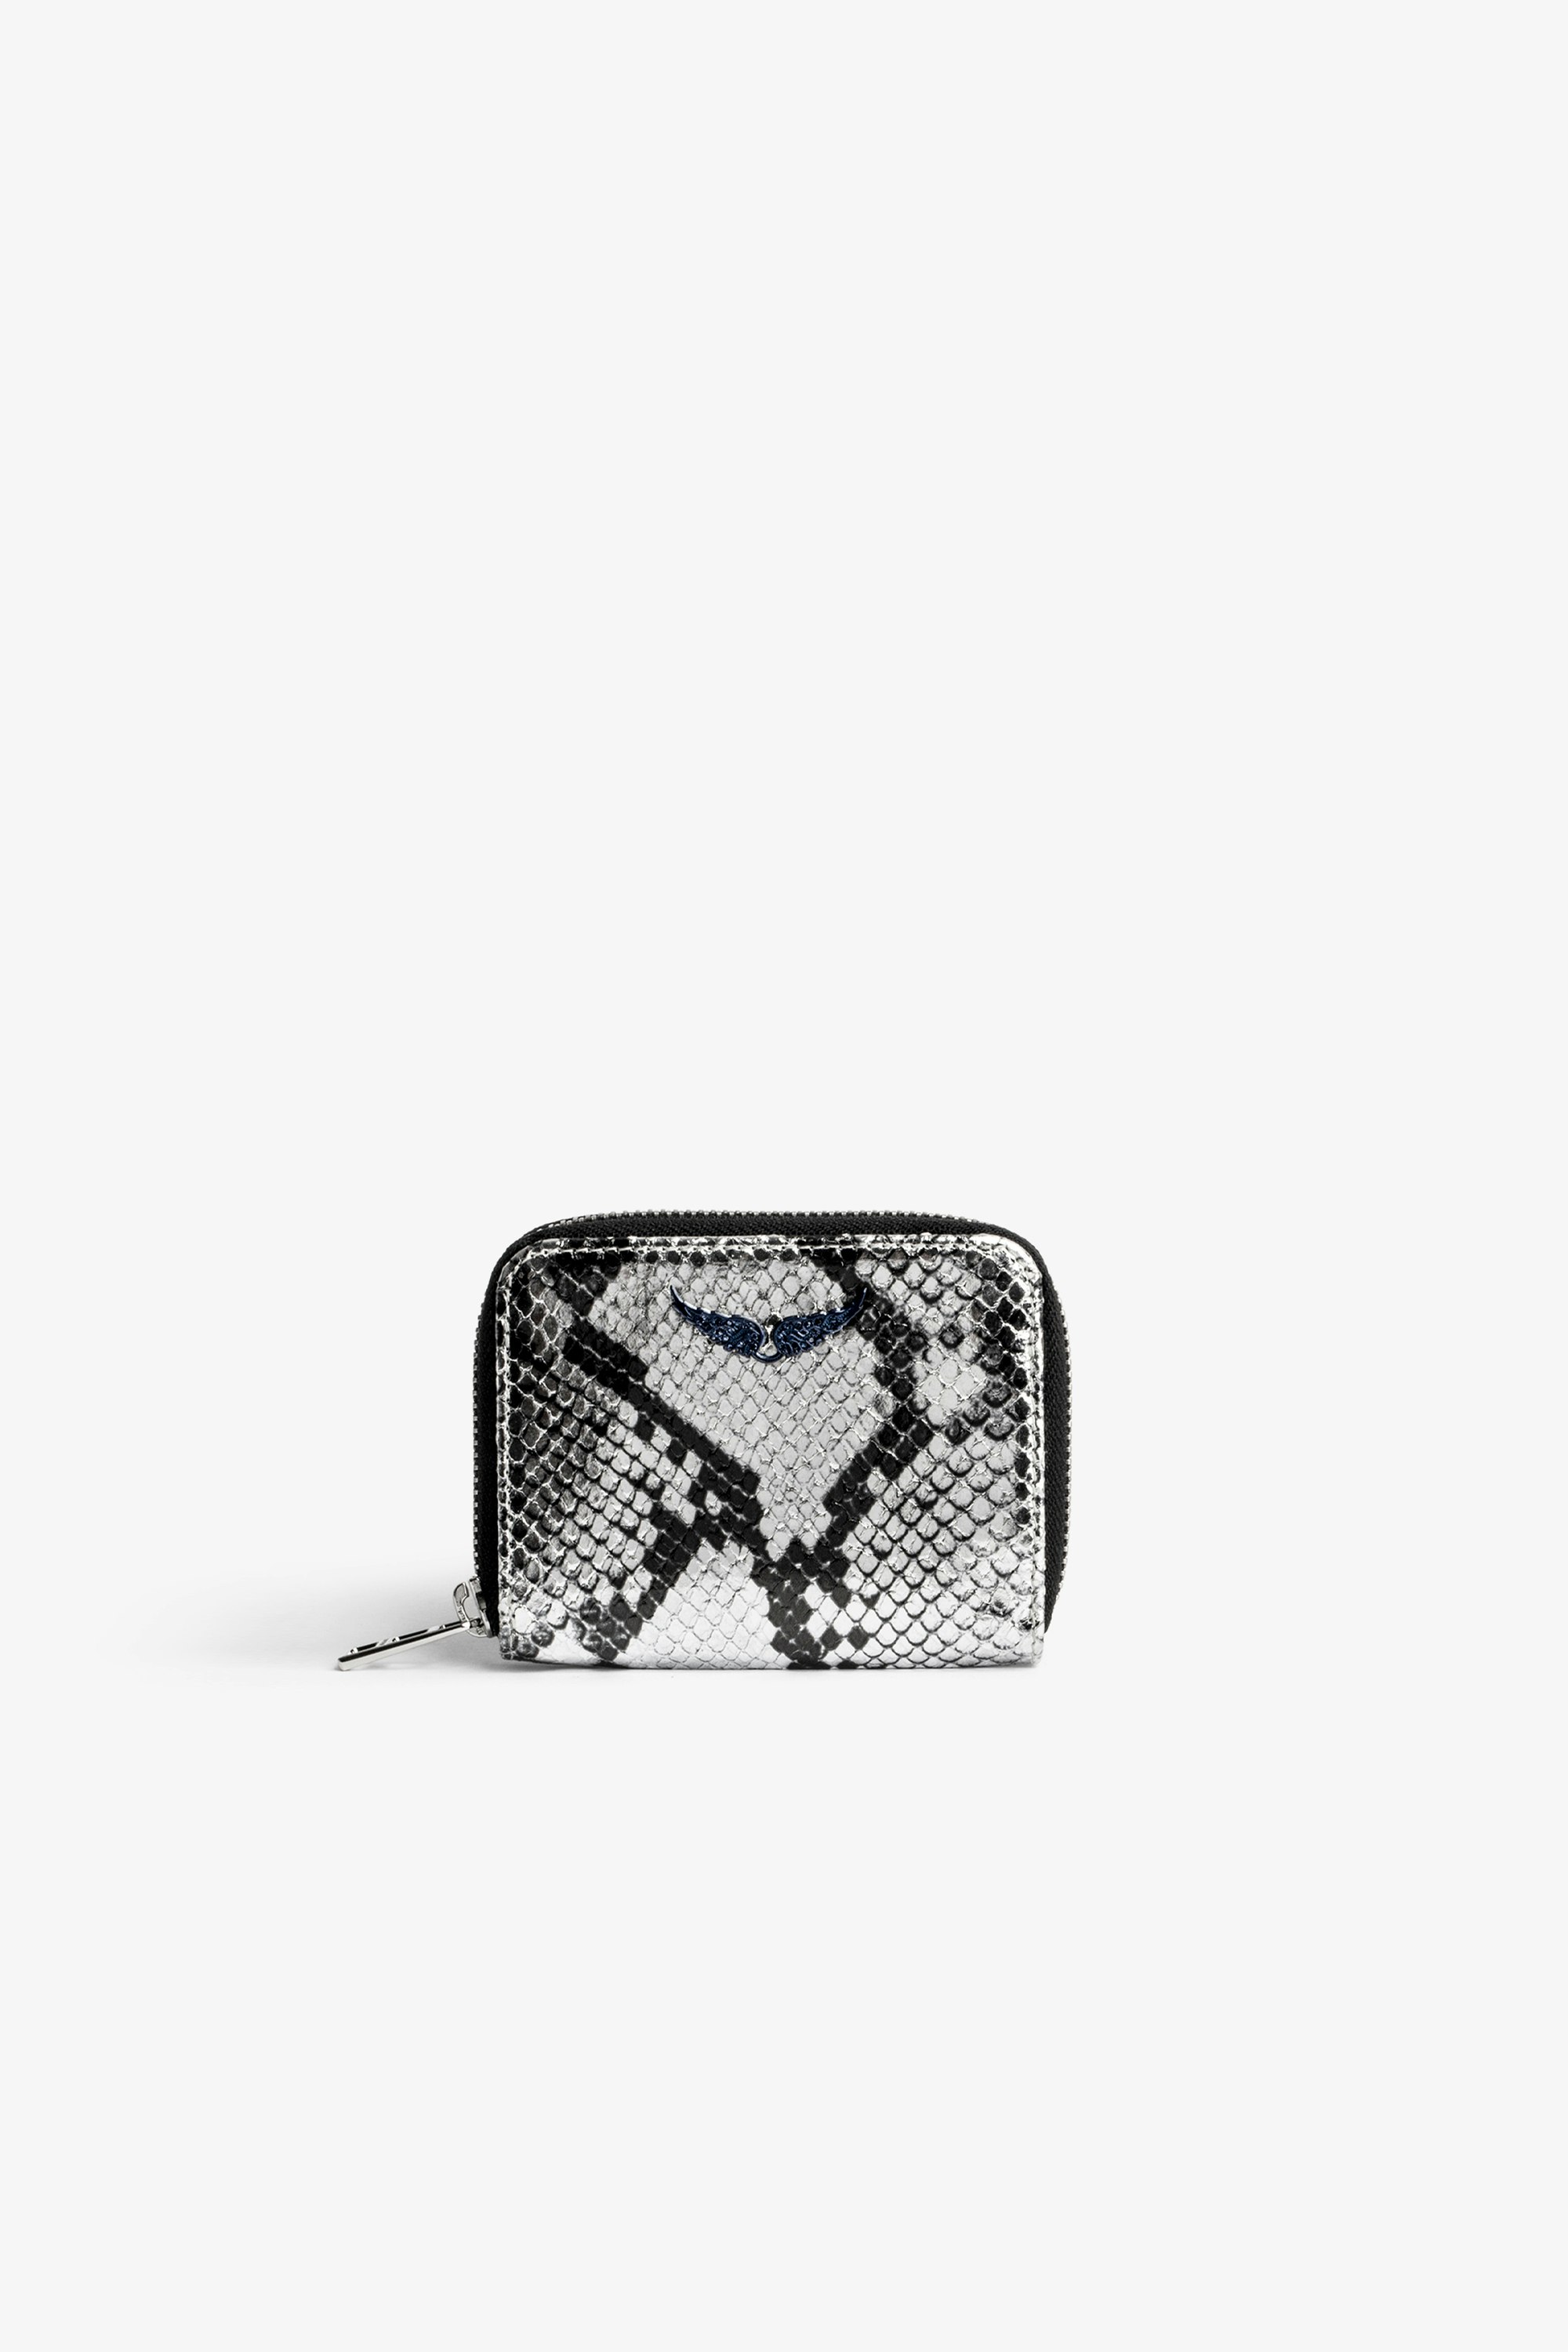 Mini ZV Coin Purse Women’s silver metallic snake-embossed leather zipped coin purse with crystal-embellished wings charm